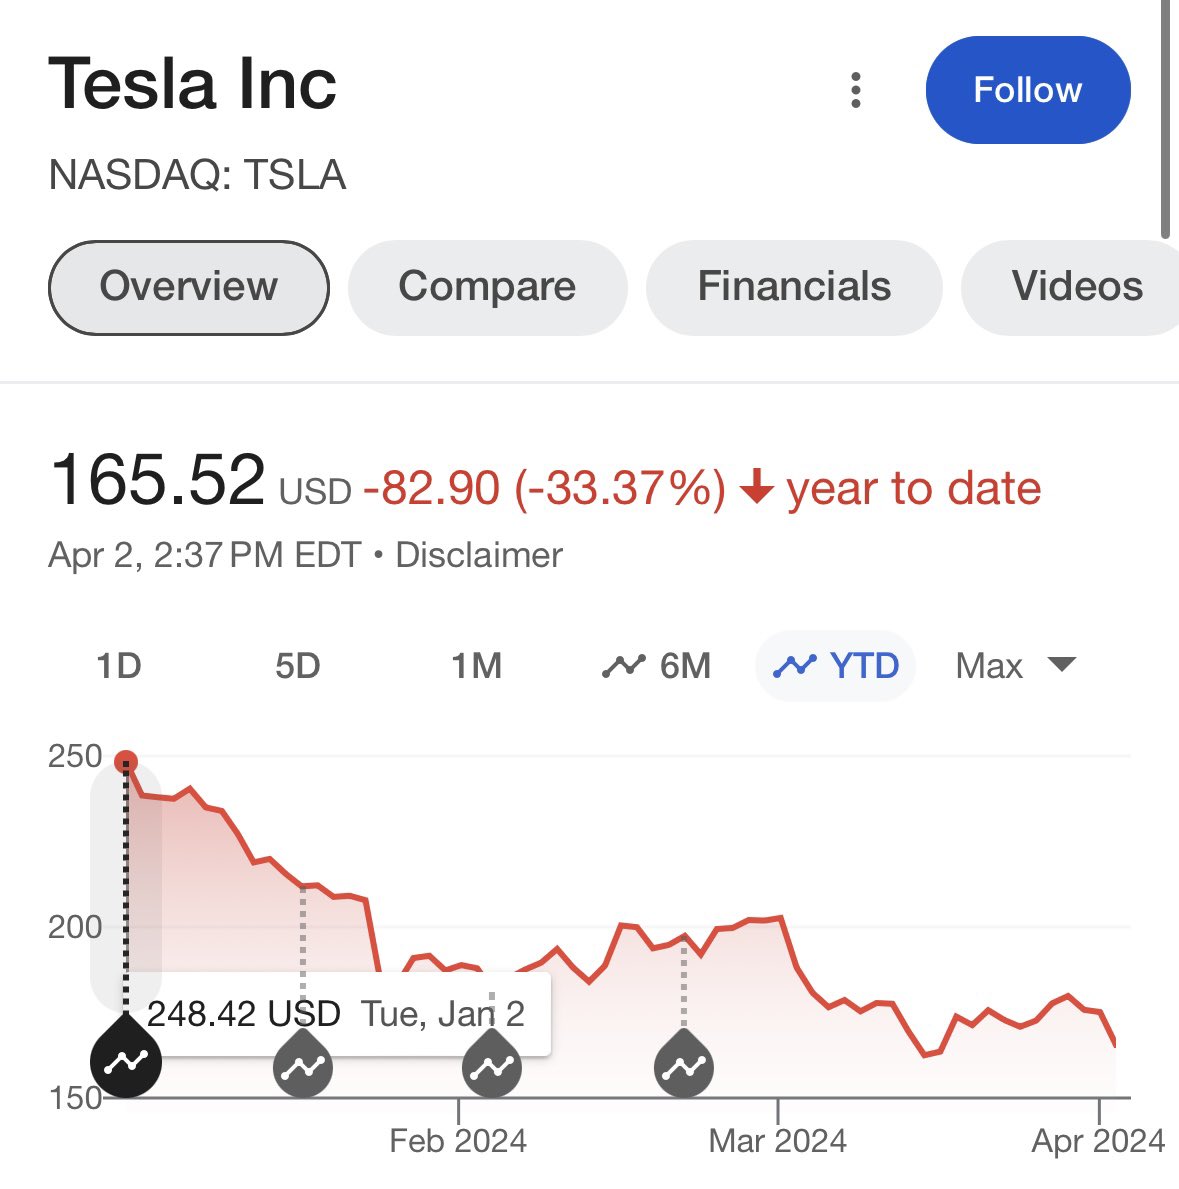 With its disastrous production and delivery figures, Tesla’s stock is now down 33% year-to-date. The Dow is up nearly 4% over that span and Nasdaq is up 10%. Strategy of cutting prices to stimulate demand has run its course. And brand equity has tanked. wapo.st/49k56Oc